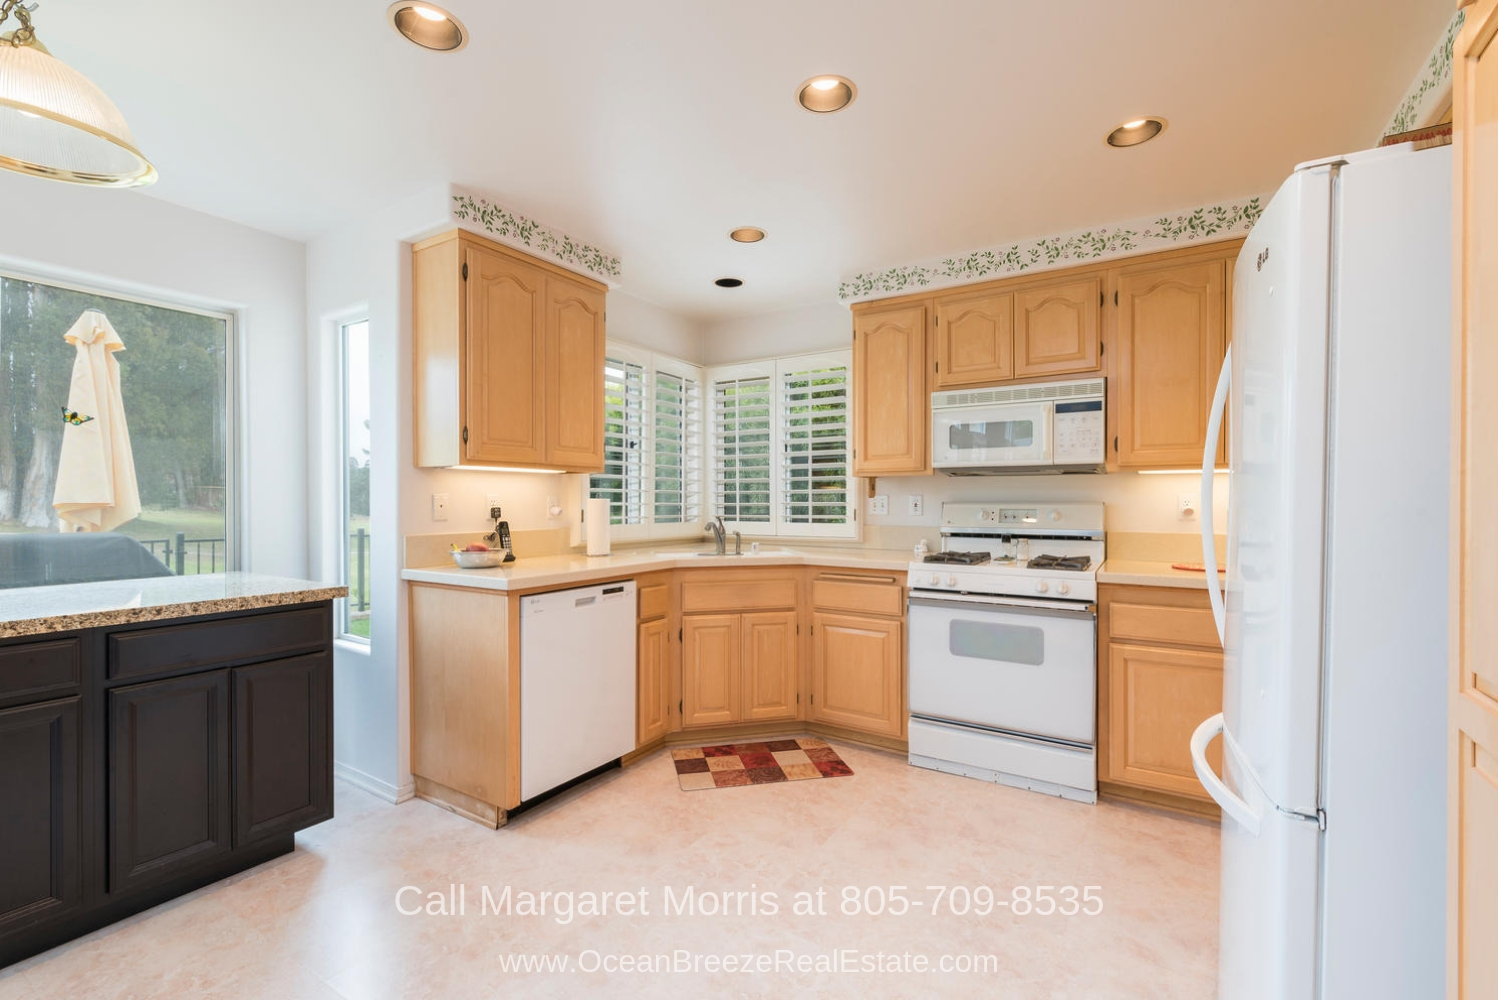 Nipomo CA  Real Estate Properties for Sale - The generously-sized kitchen of this Nipomo CA property is perfect for entertaining. 